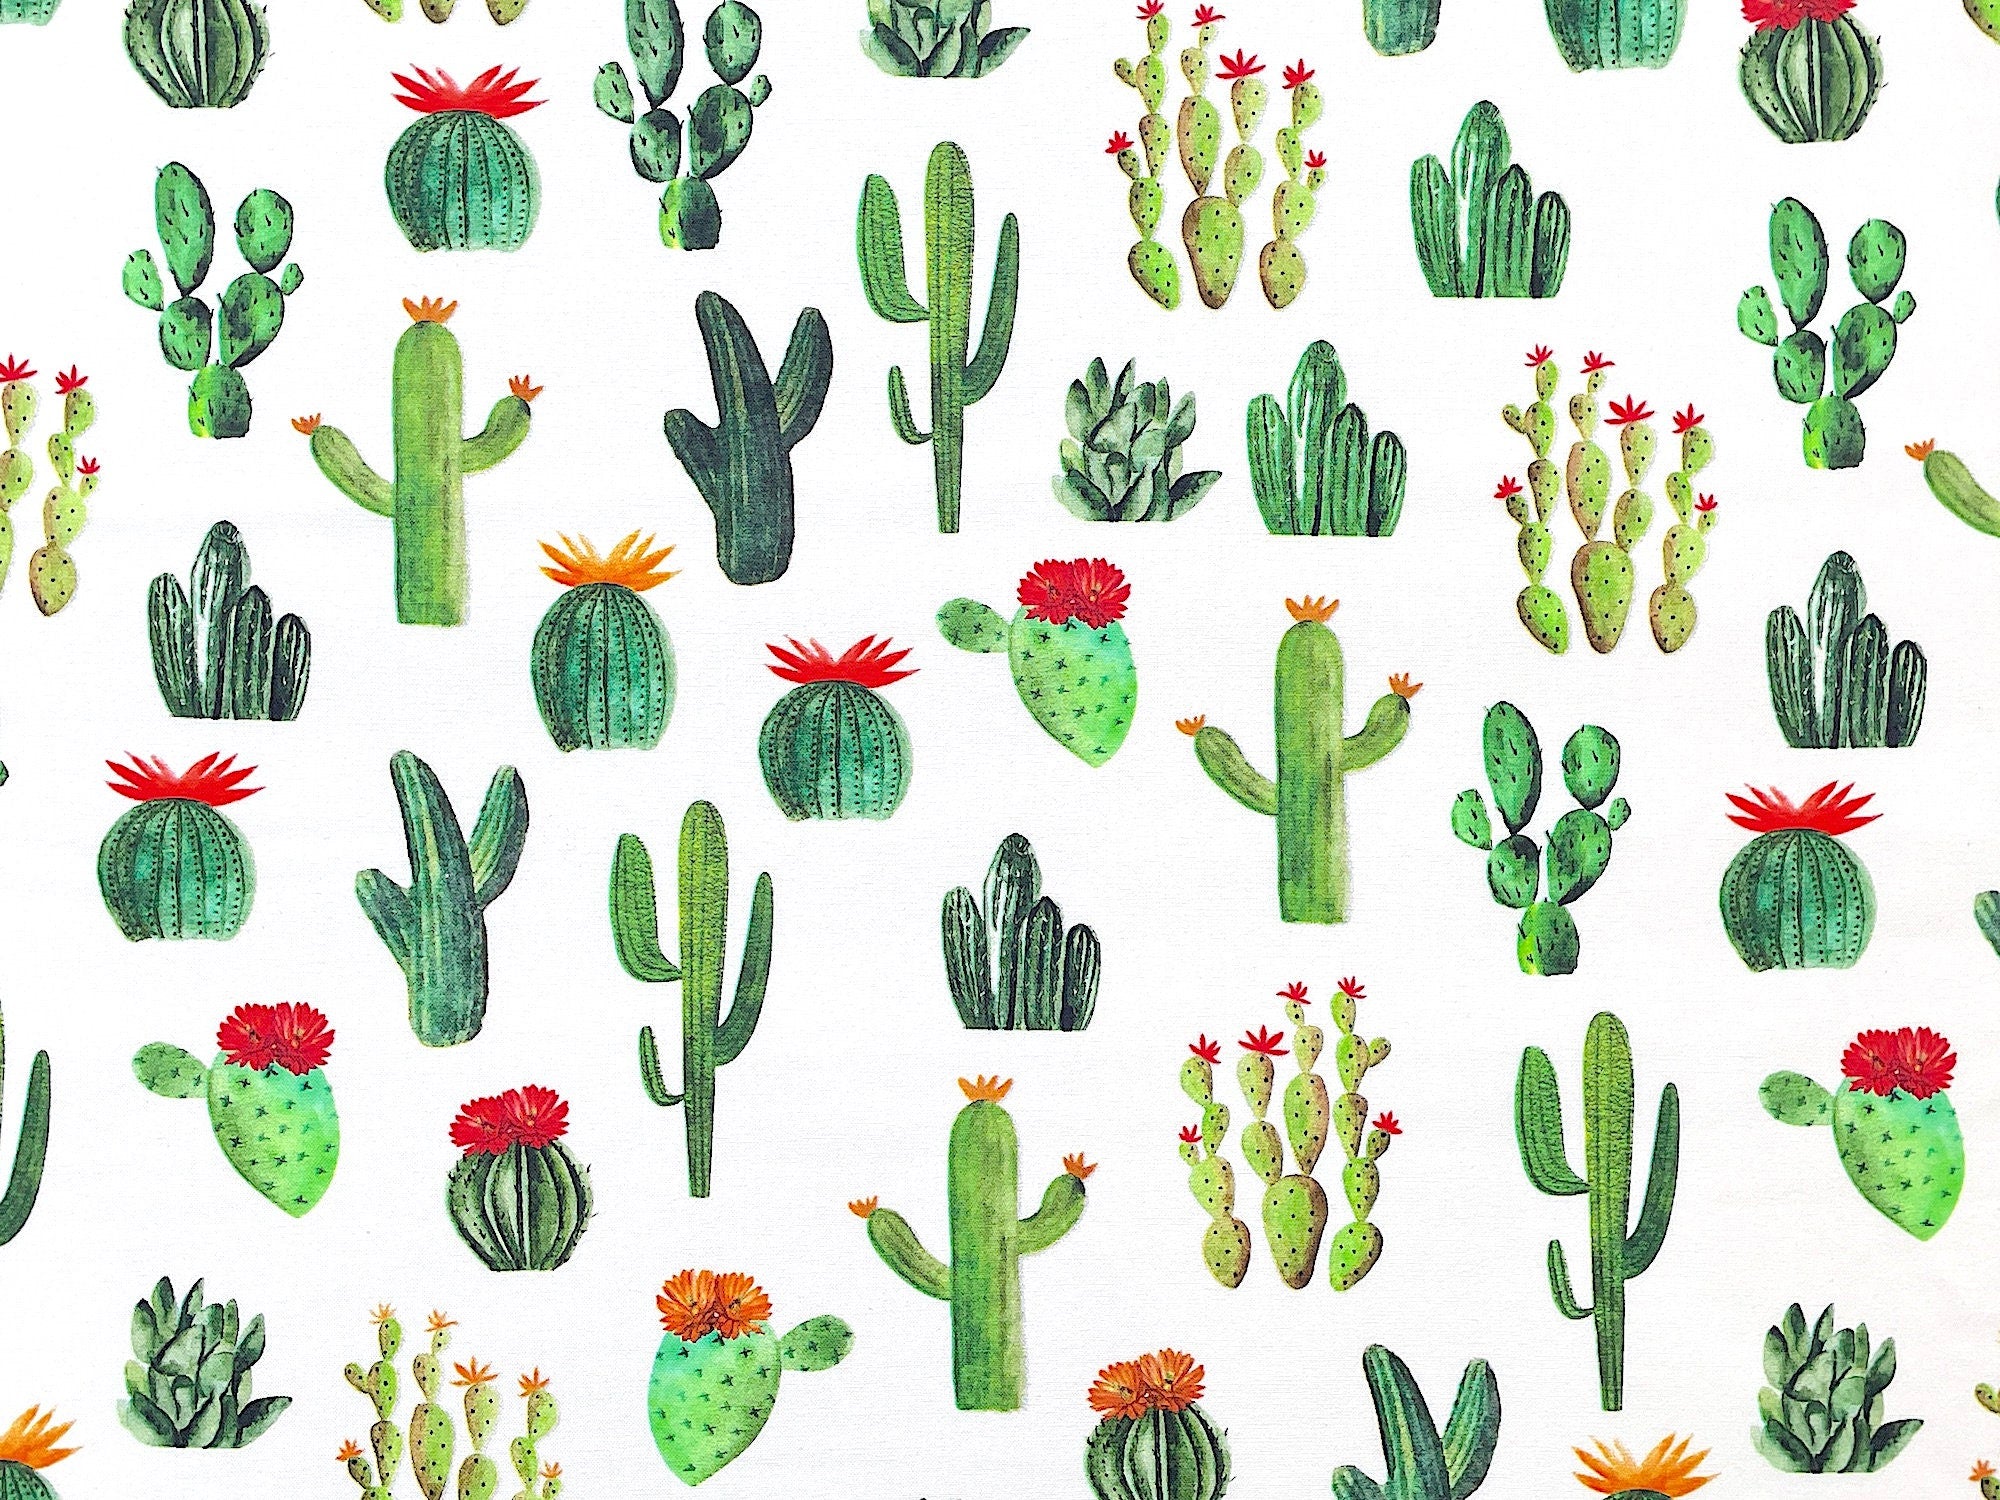 This fabric is part of the Cowboy Up collection. This White cotton fabric is covered with green cactus. The cactus are in a random pattern.